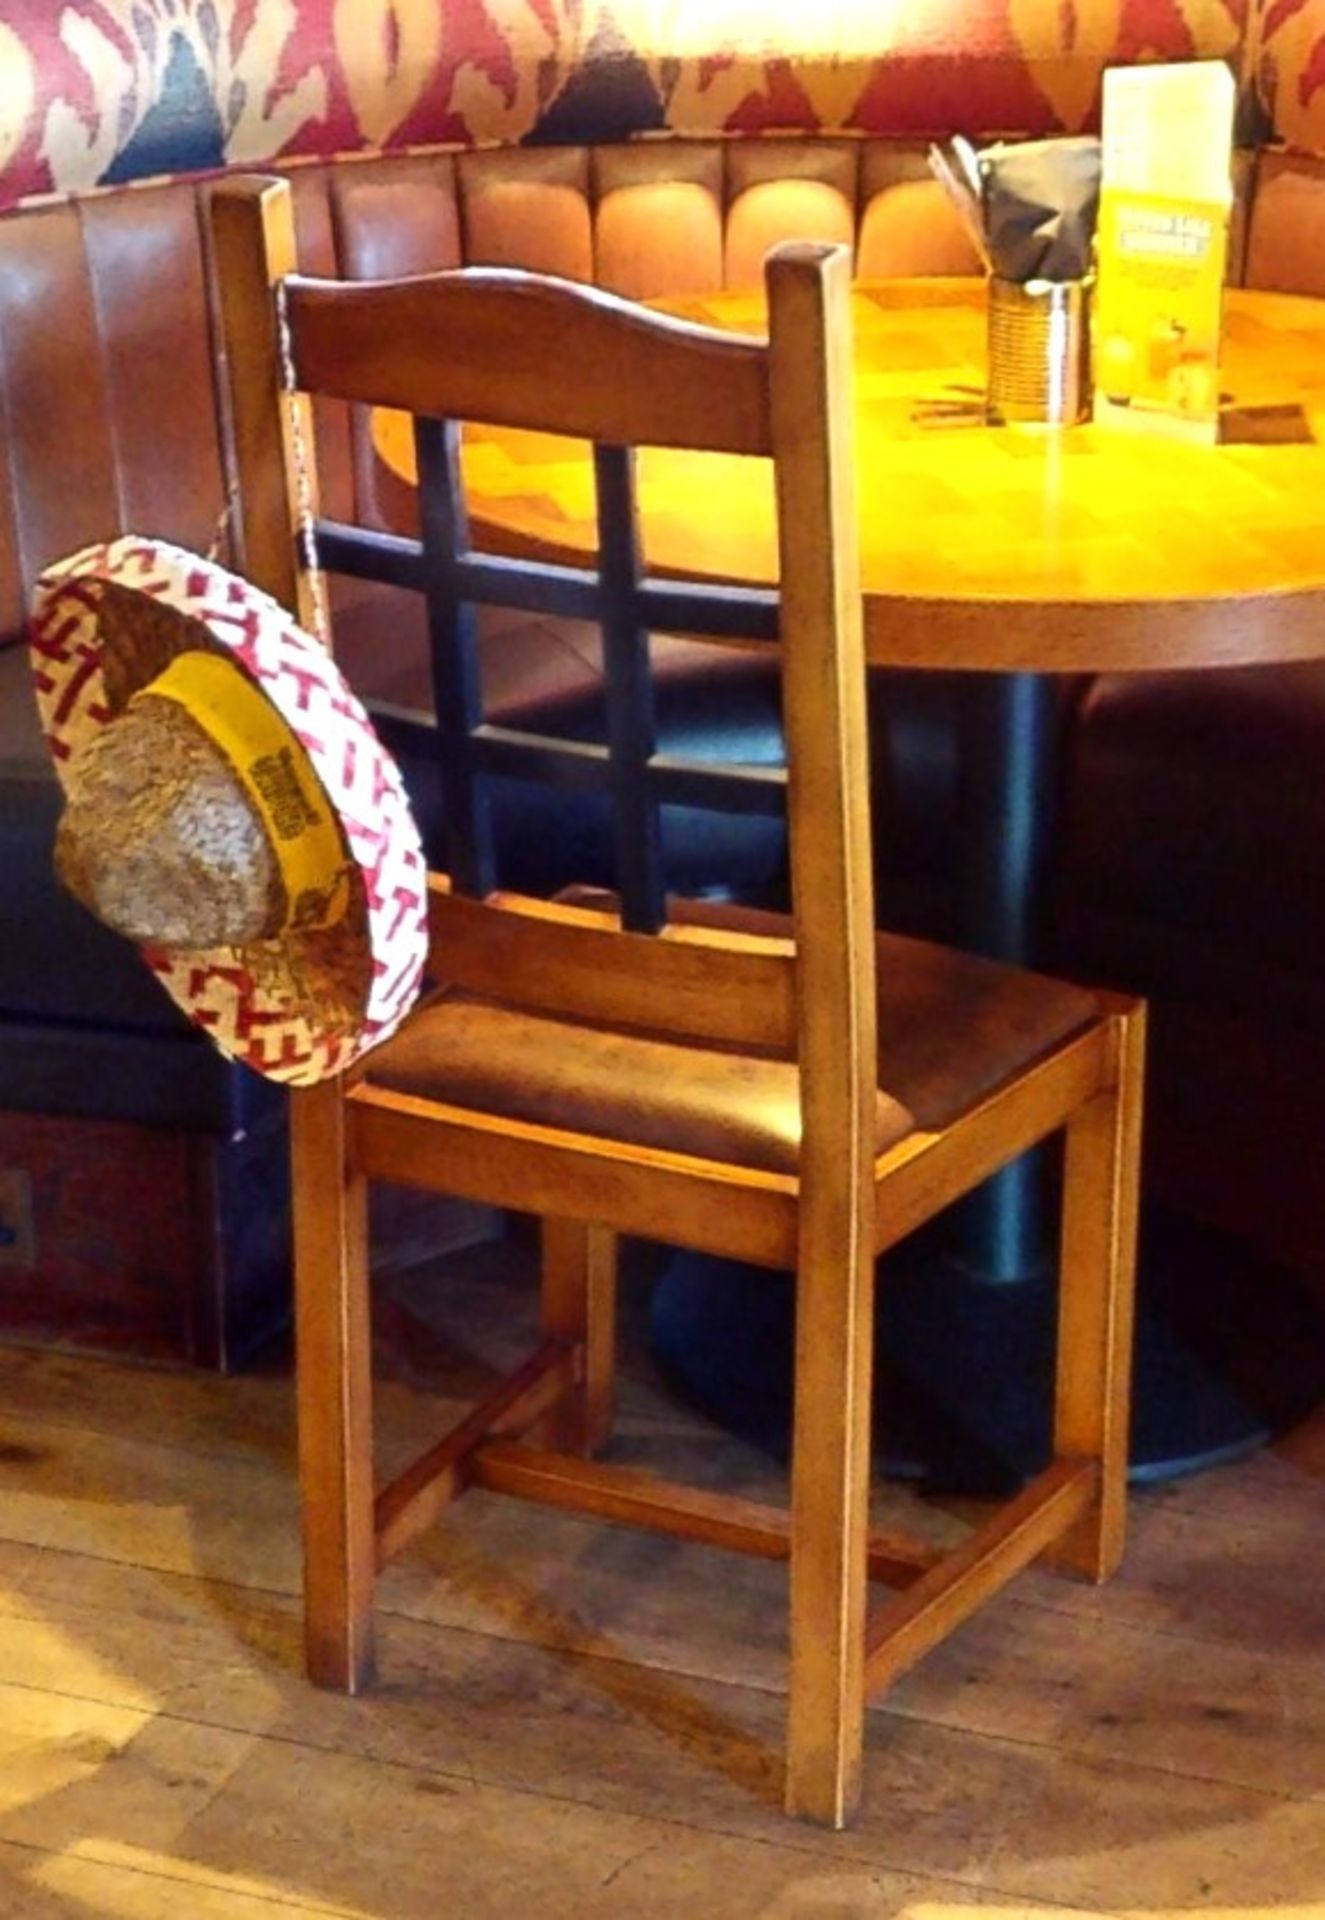 10 x Restaurant High Back Dining Chairs With Faux Leather Brown Seat Pads and Lattice Backs - Approx - Image 2 of 3